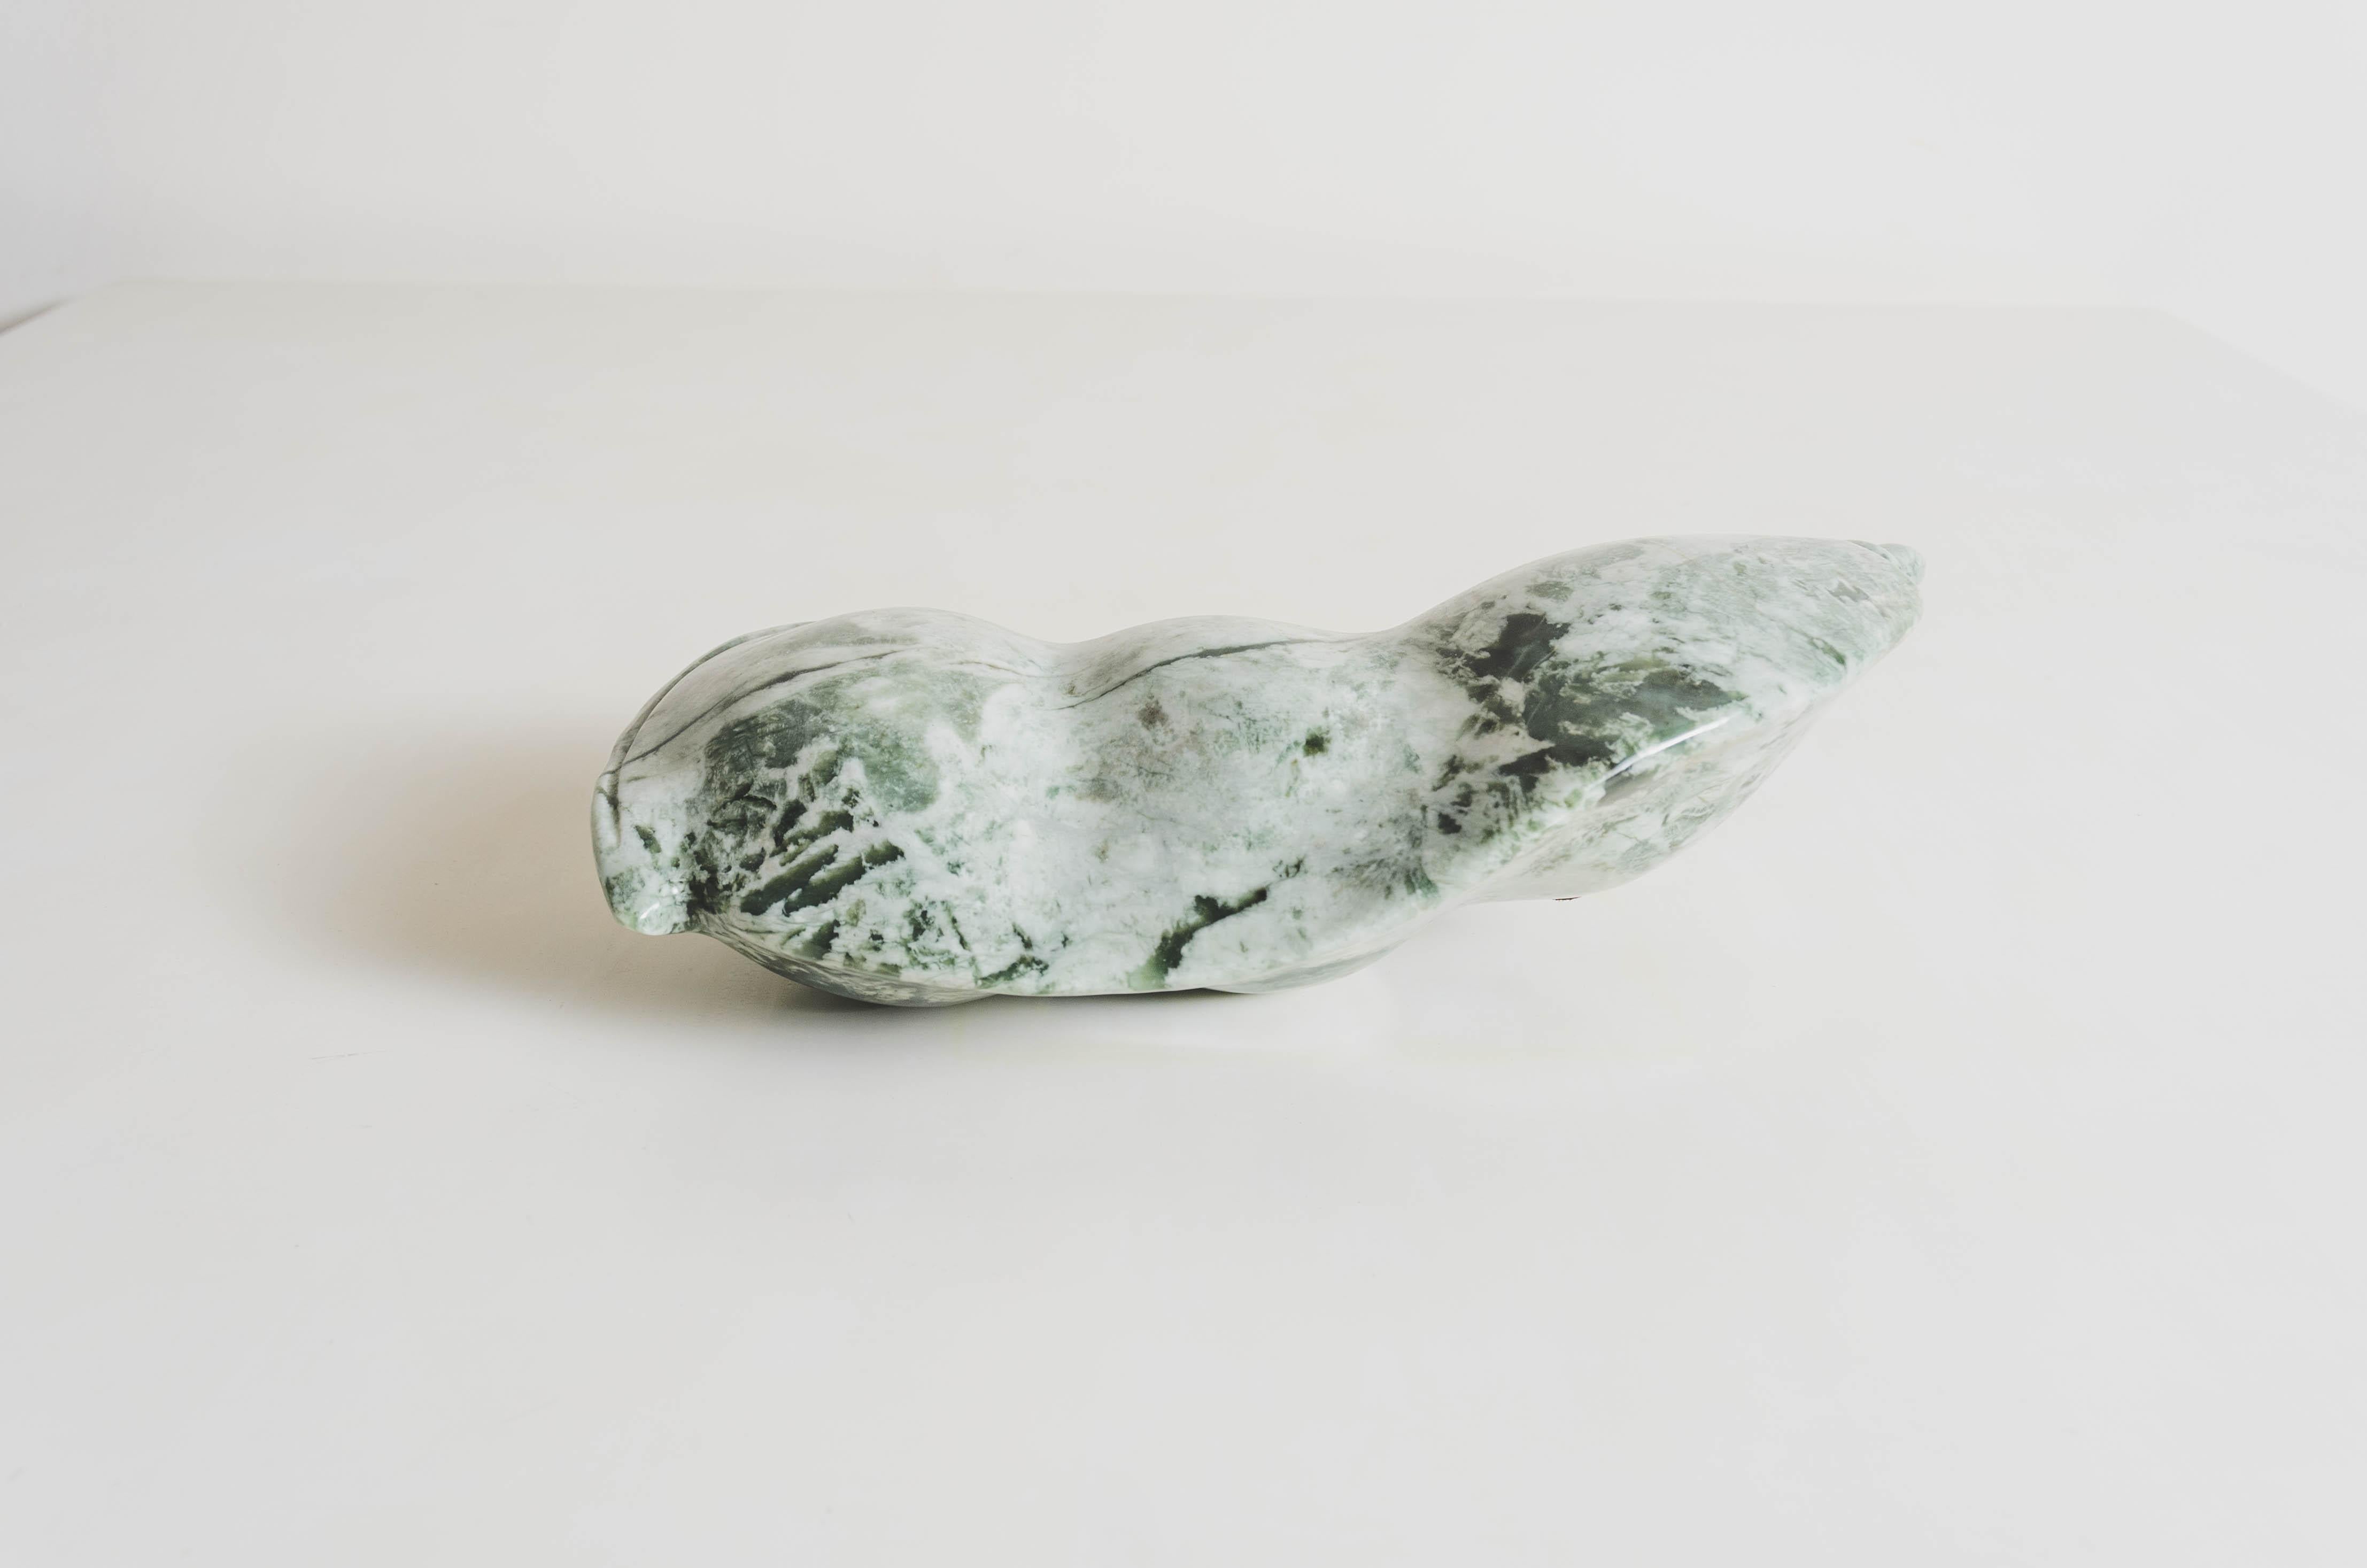 Lima bean sculpture
Nephrite Jade
Hand carved
Limited edition

Known as the “Stone of Heaven,” Nephrite Jade is prized for both its aesthetic beauty and symbolic value, with the ancient Chinese believing it to be a bridge between heaven and